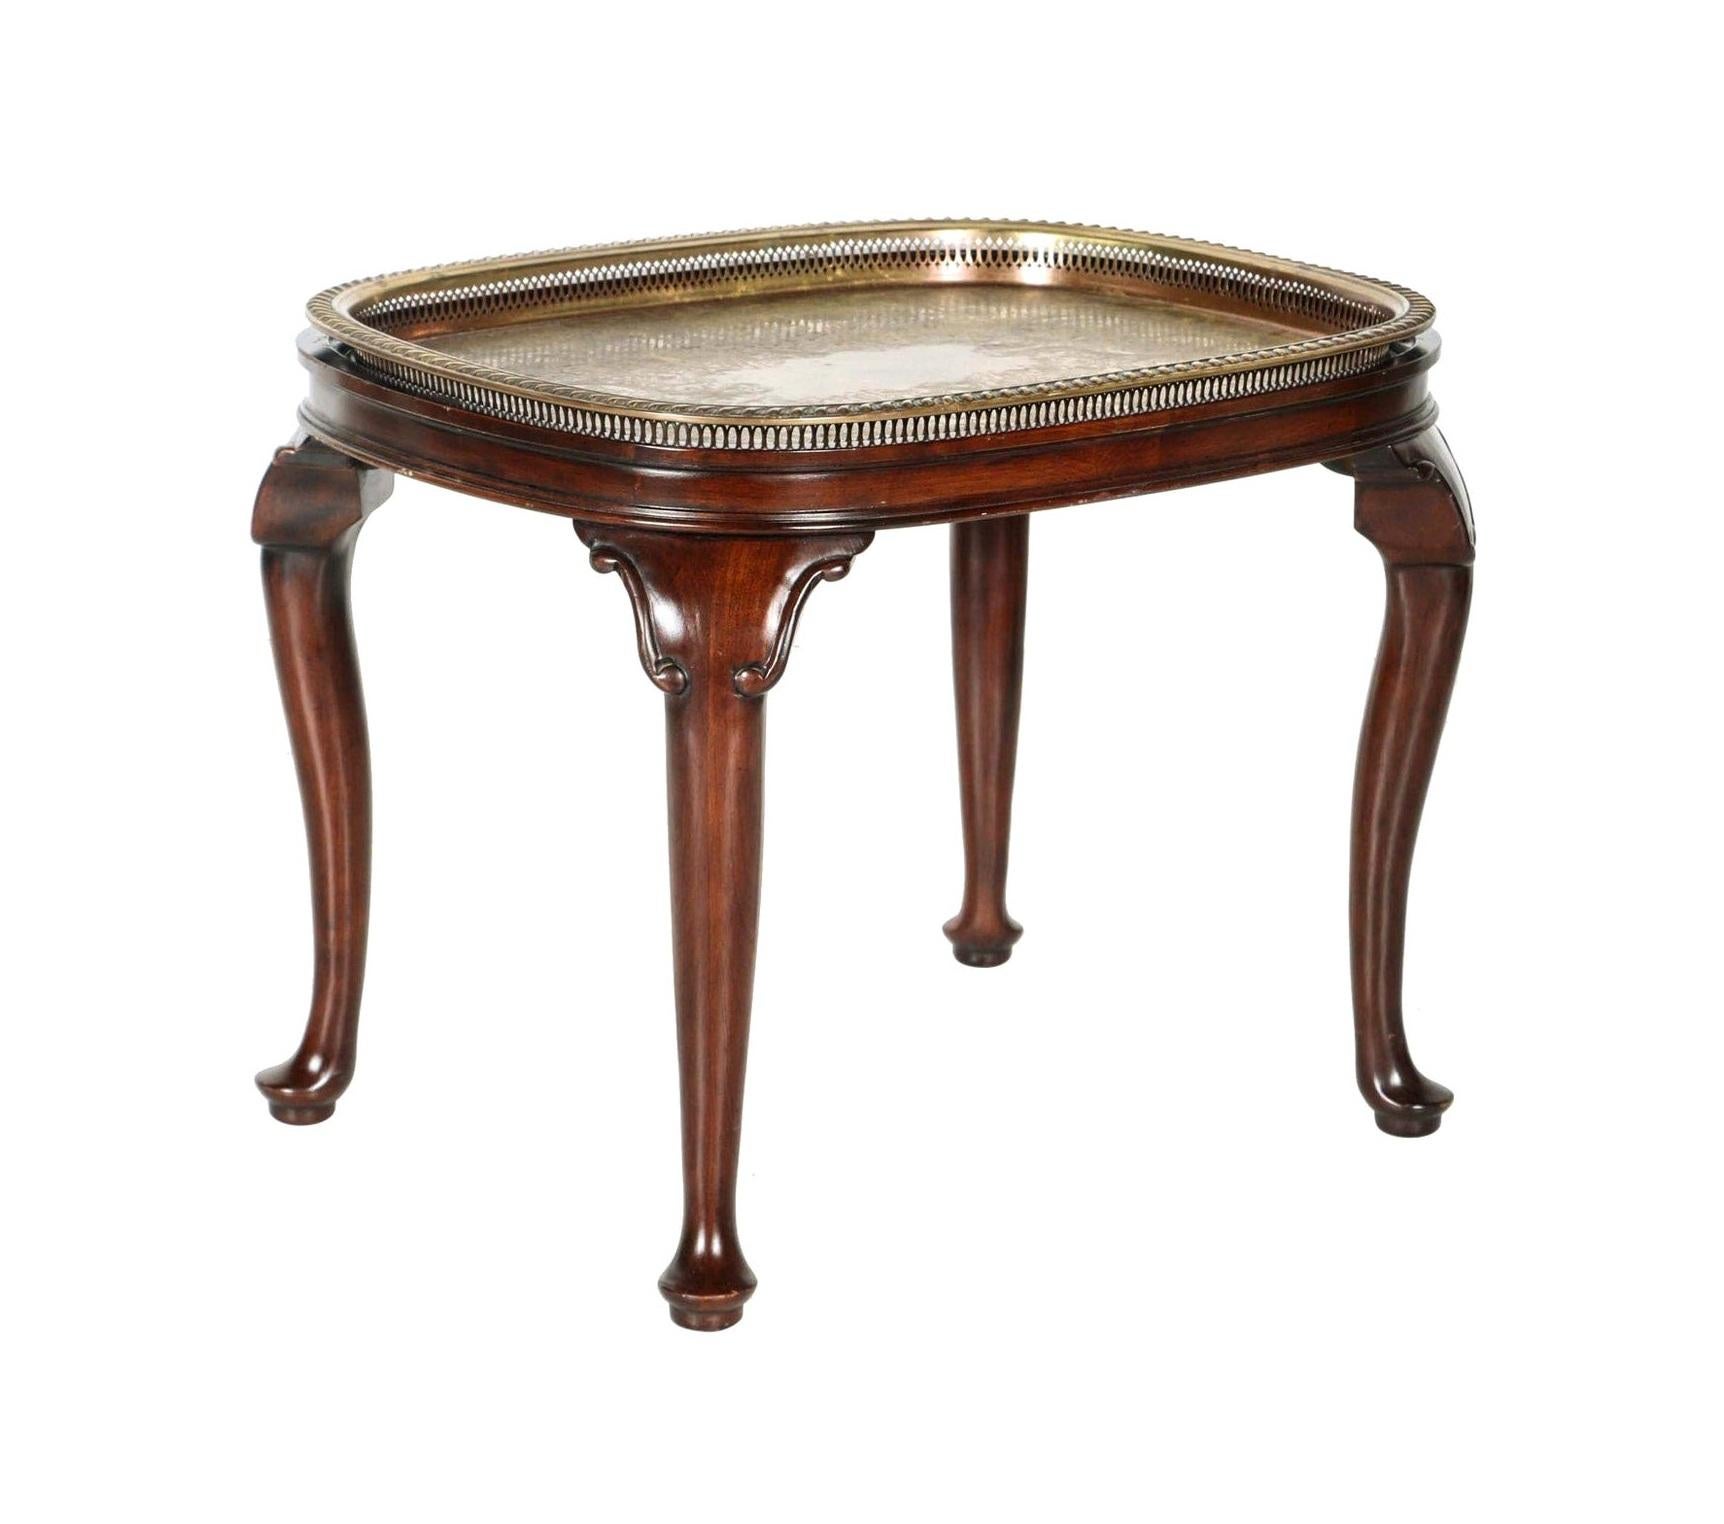 An elegant pair of vintage Queen Anne style mahogany tray top side tables. Each table features a rectangular top with rounded corners and raised, molded edges. A removable brass tray with raised pierced edges can be placed on top. The brass tray has